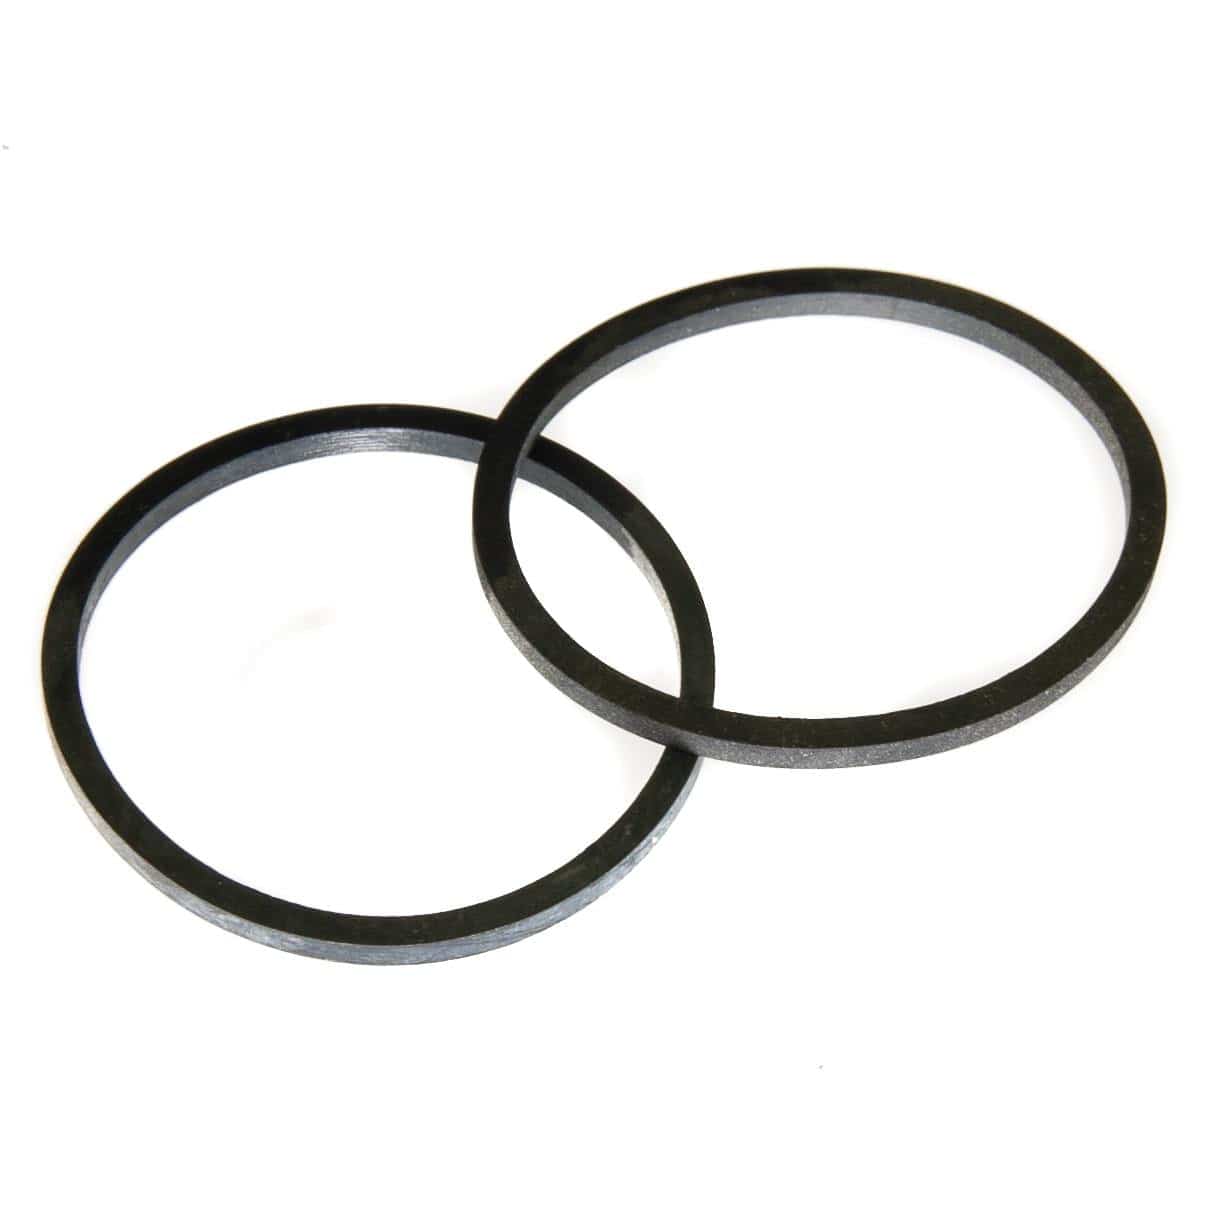 32mm Waste Trap Inlet Sealing Washer (Pack of 2) Tap Washers Thunderfix 901530